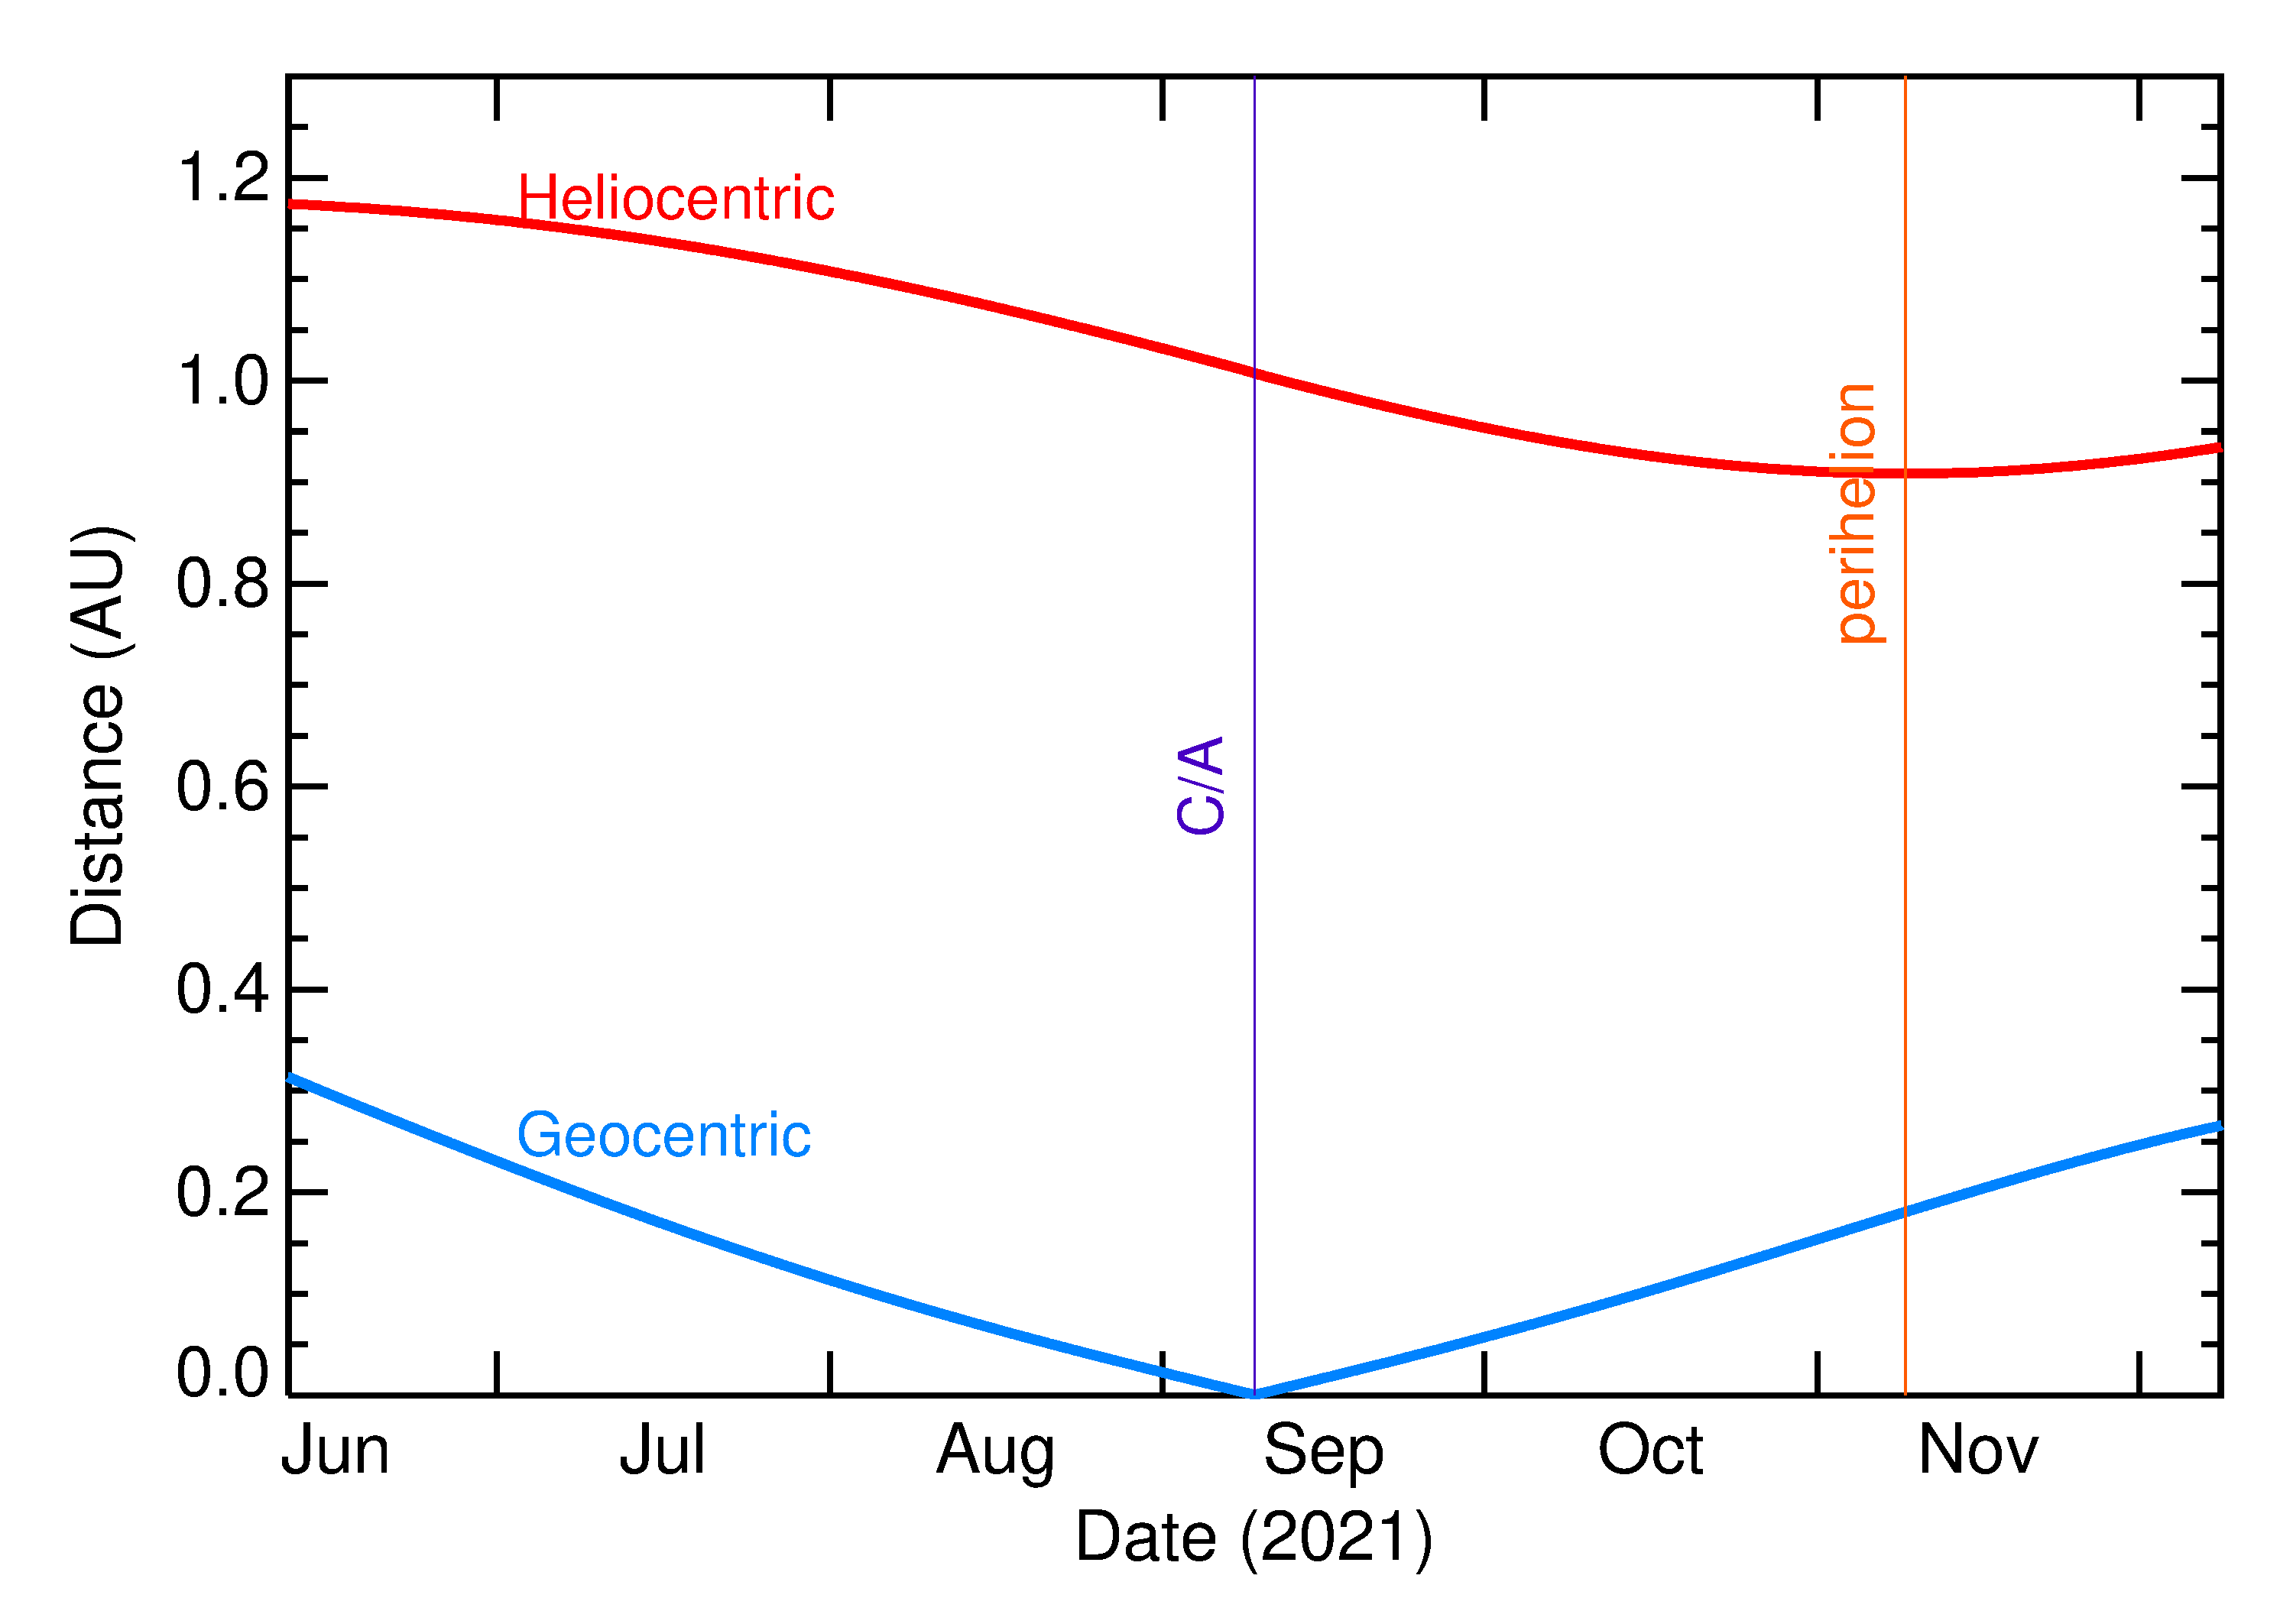 Heliocentric and Geocentric Distances of 2021 RP2 in the months around closest approach